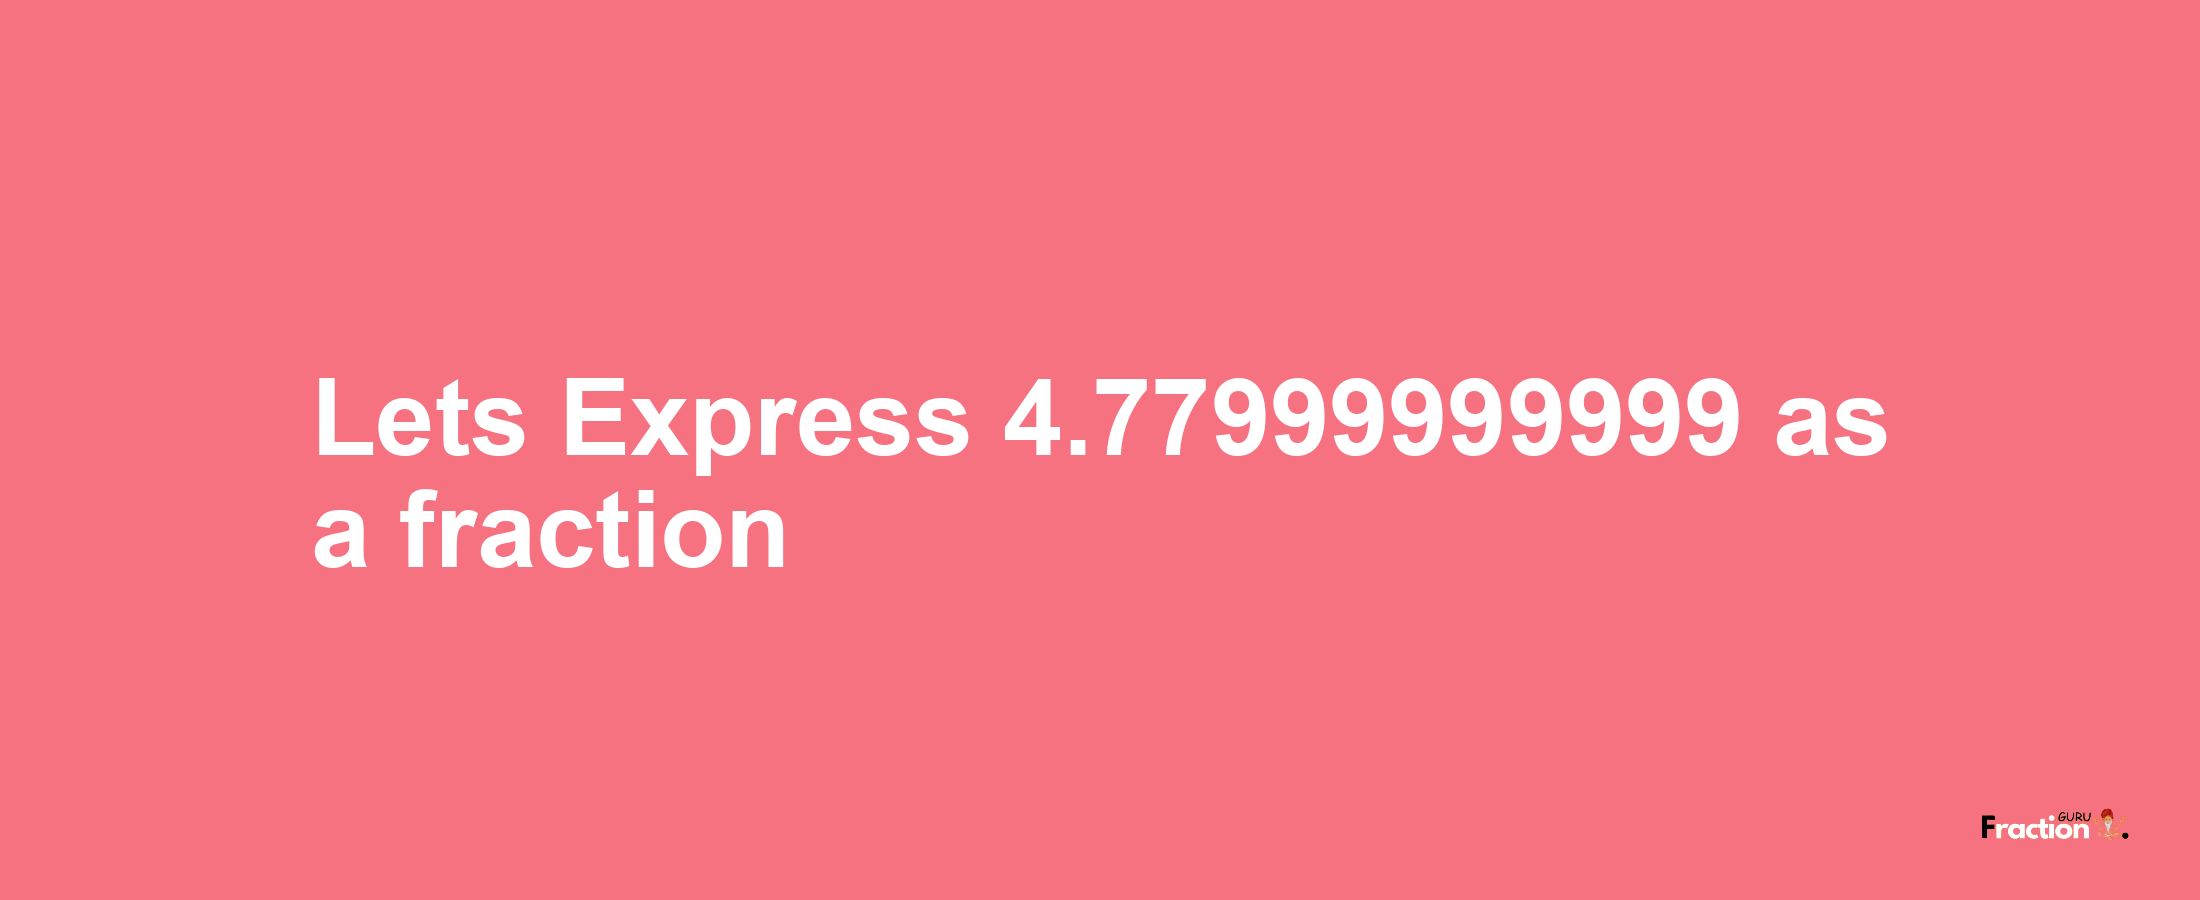 Lets Express 4.77999999999 as afraction